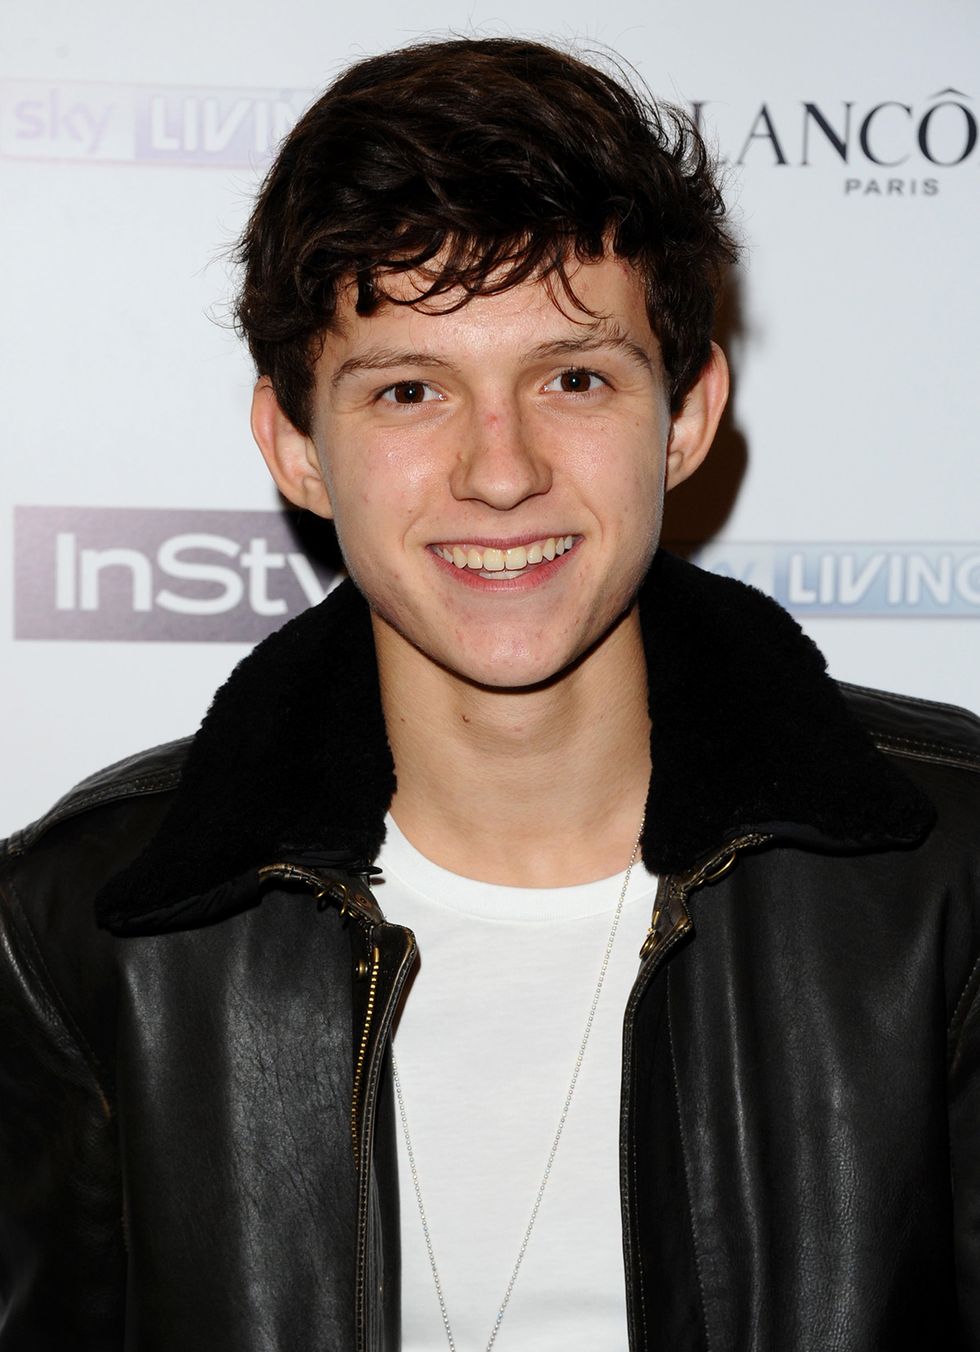 Hair, Hairstyle, Leather, Jacket, Leather jacket, Black hair, Textile, Smile, Jaw, Premiere, 